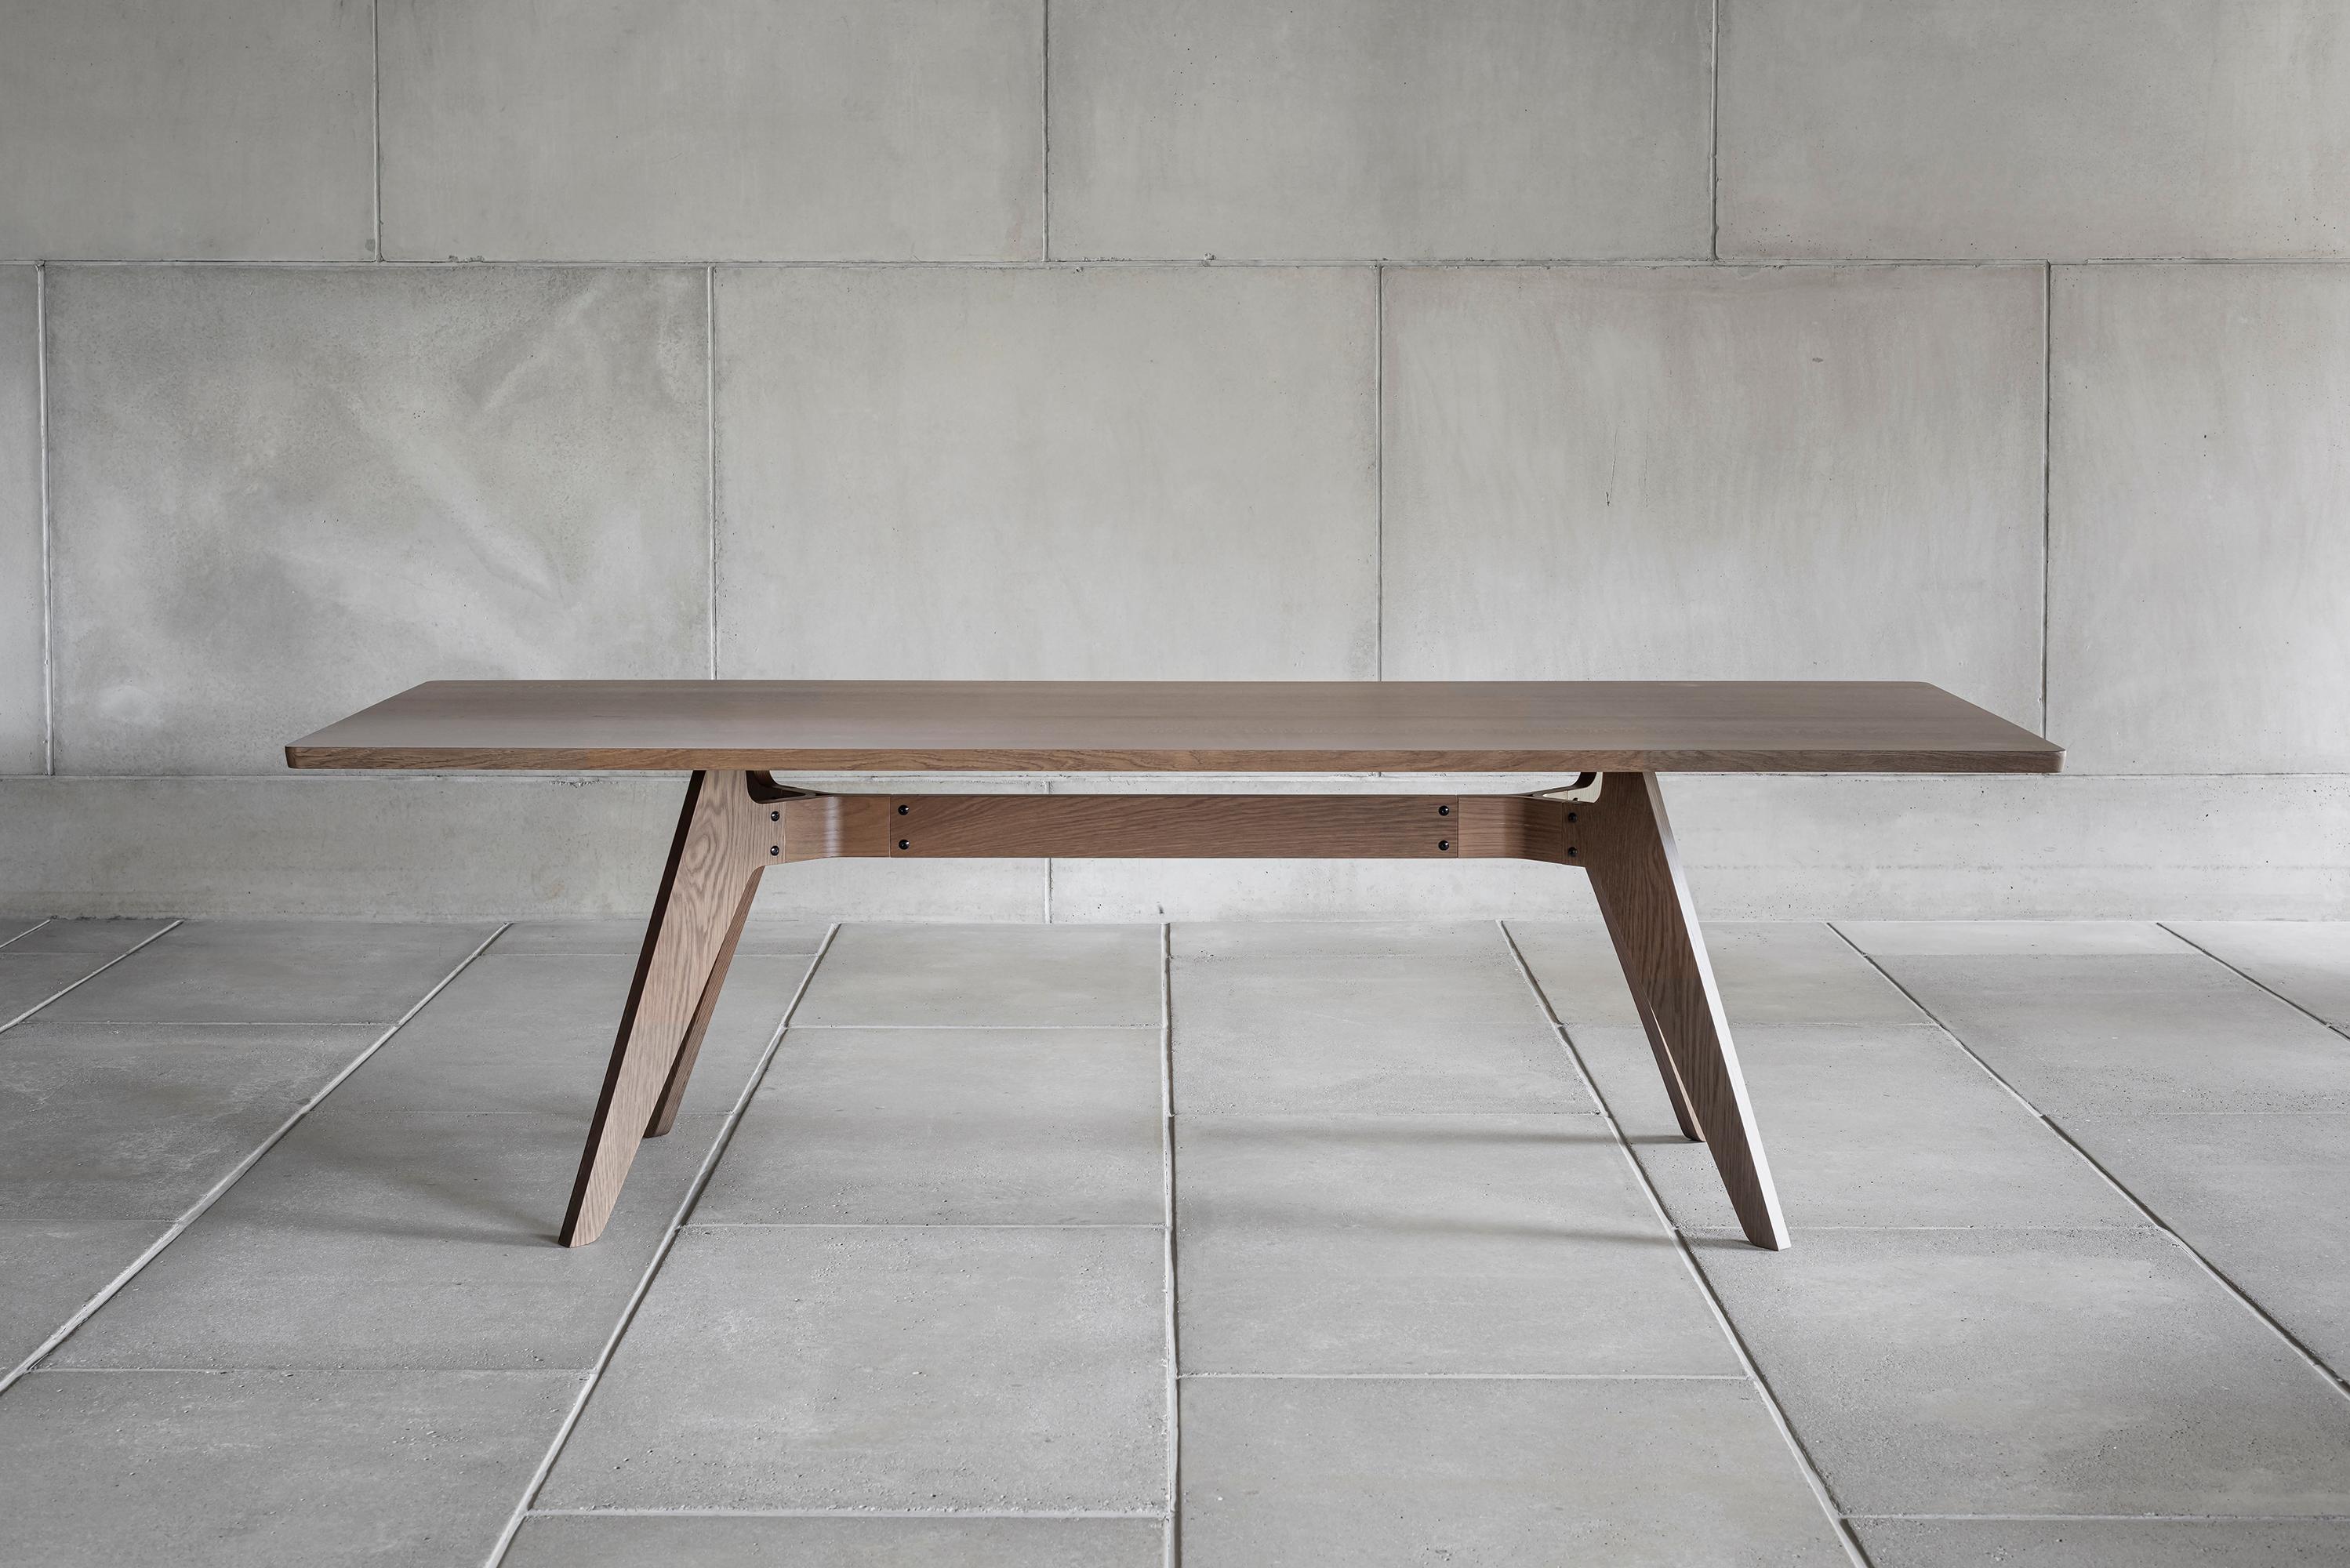 Lavitta Dining Table 180 cm designed by Timo Mikkonen & Antti Rouhunkoski
Collection Lavitta 2016 by Poiat 

Model shown on picture
Dimensions : H. 72 cm x 180 cm x 90 cm
Color : Dark Oak 

The Lavitta Collection draws upon the influences of